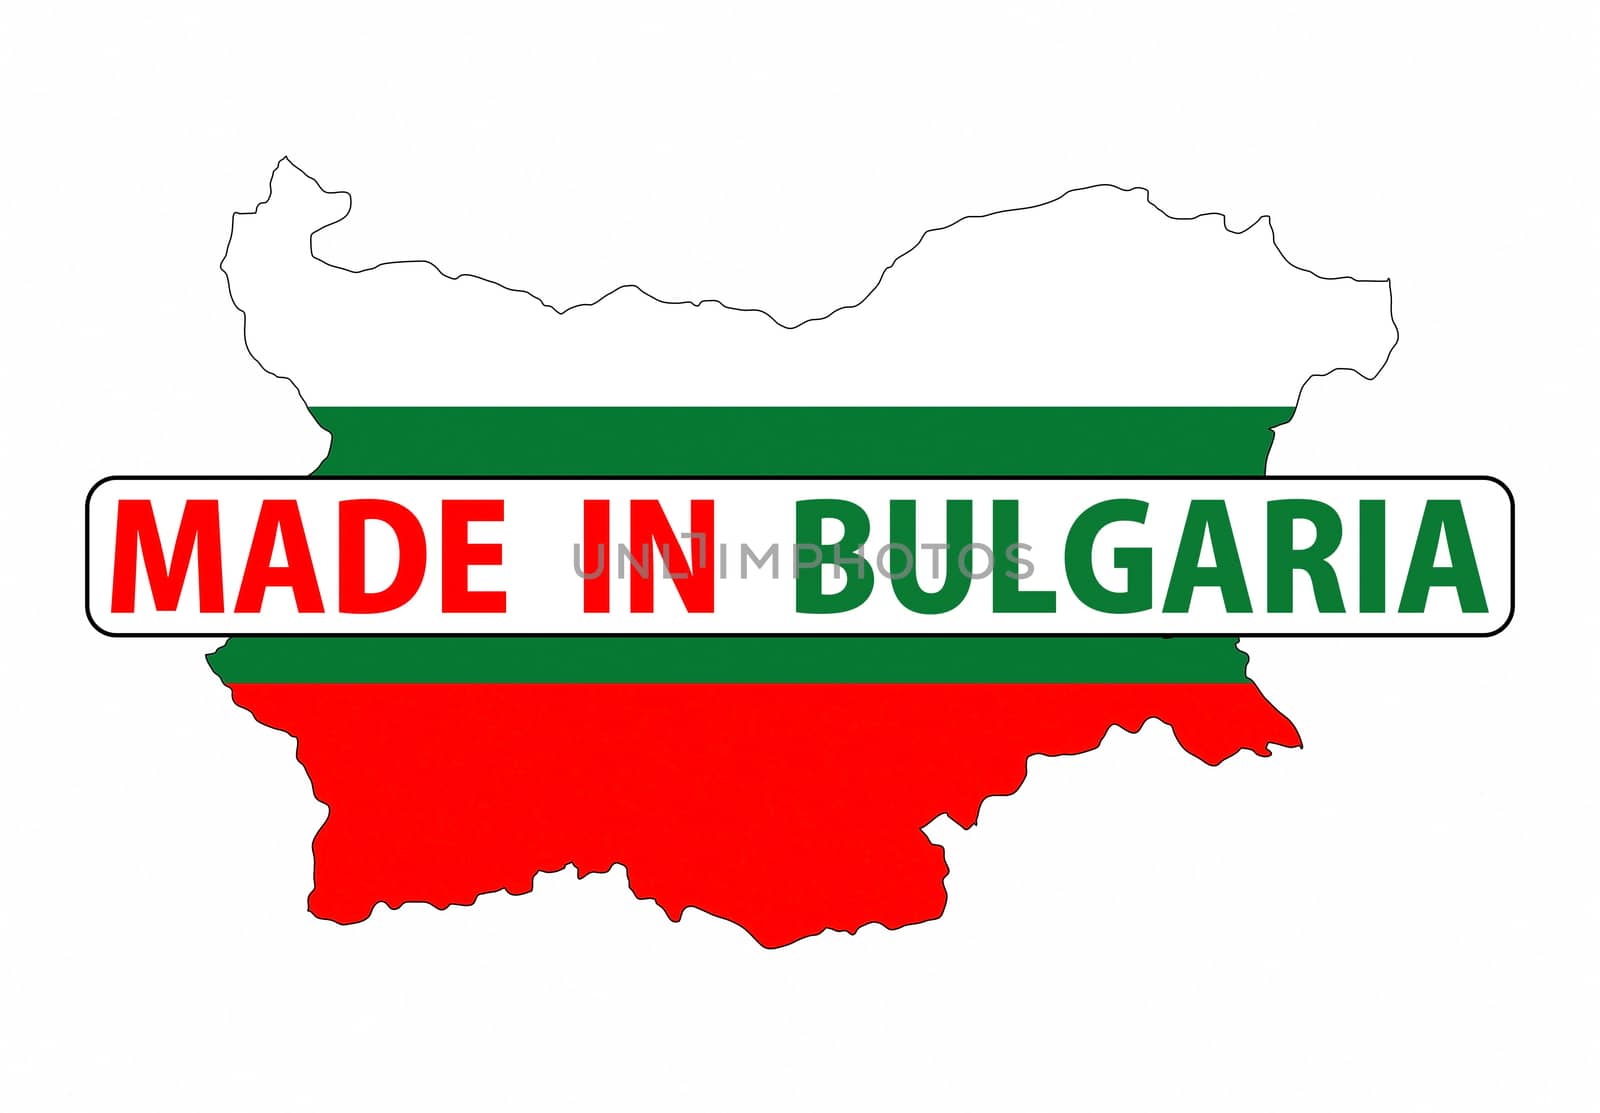 made in bulgaria country national flag map shape with text